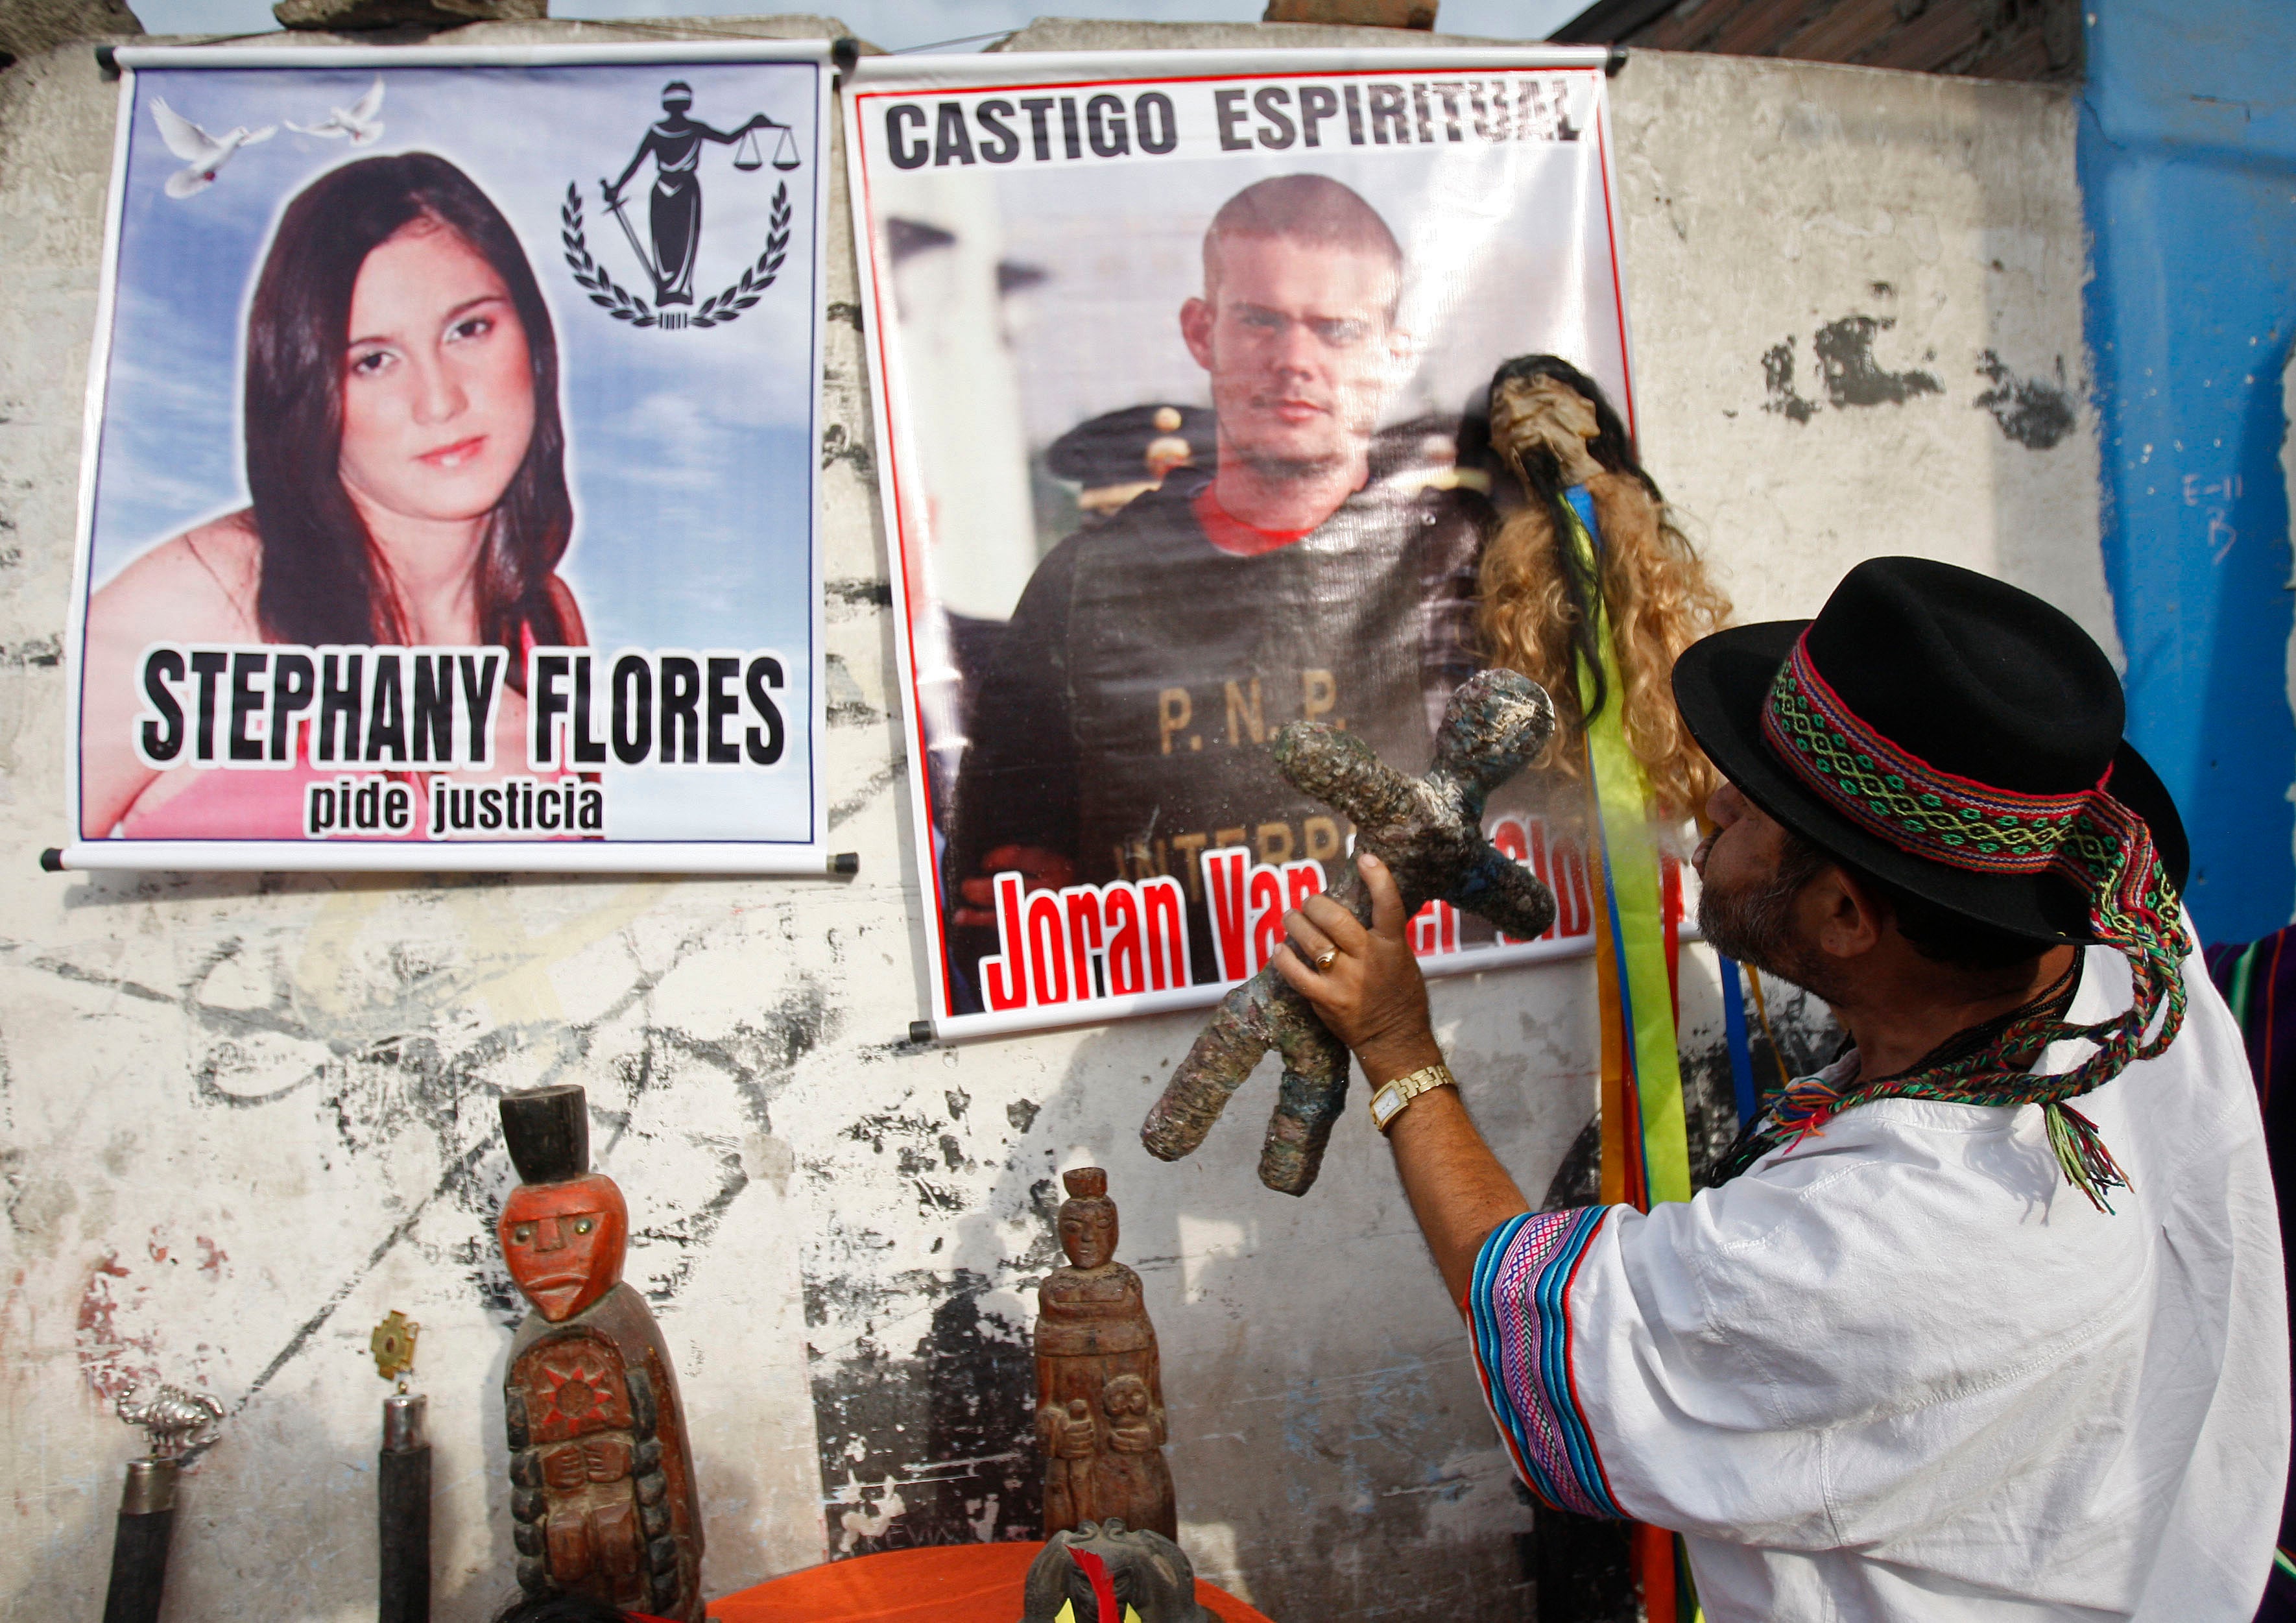 Van der Sloot pleaded guilty to the 2010 killing of Peruvian university student Stephany Flores, 21, in a Lima hotel